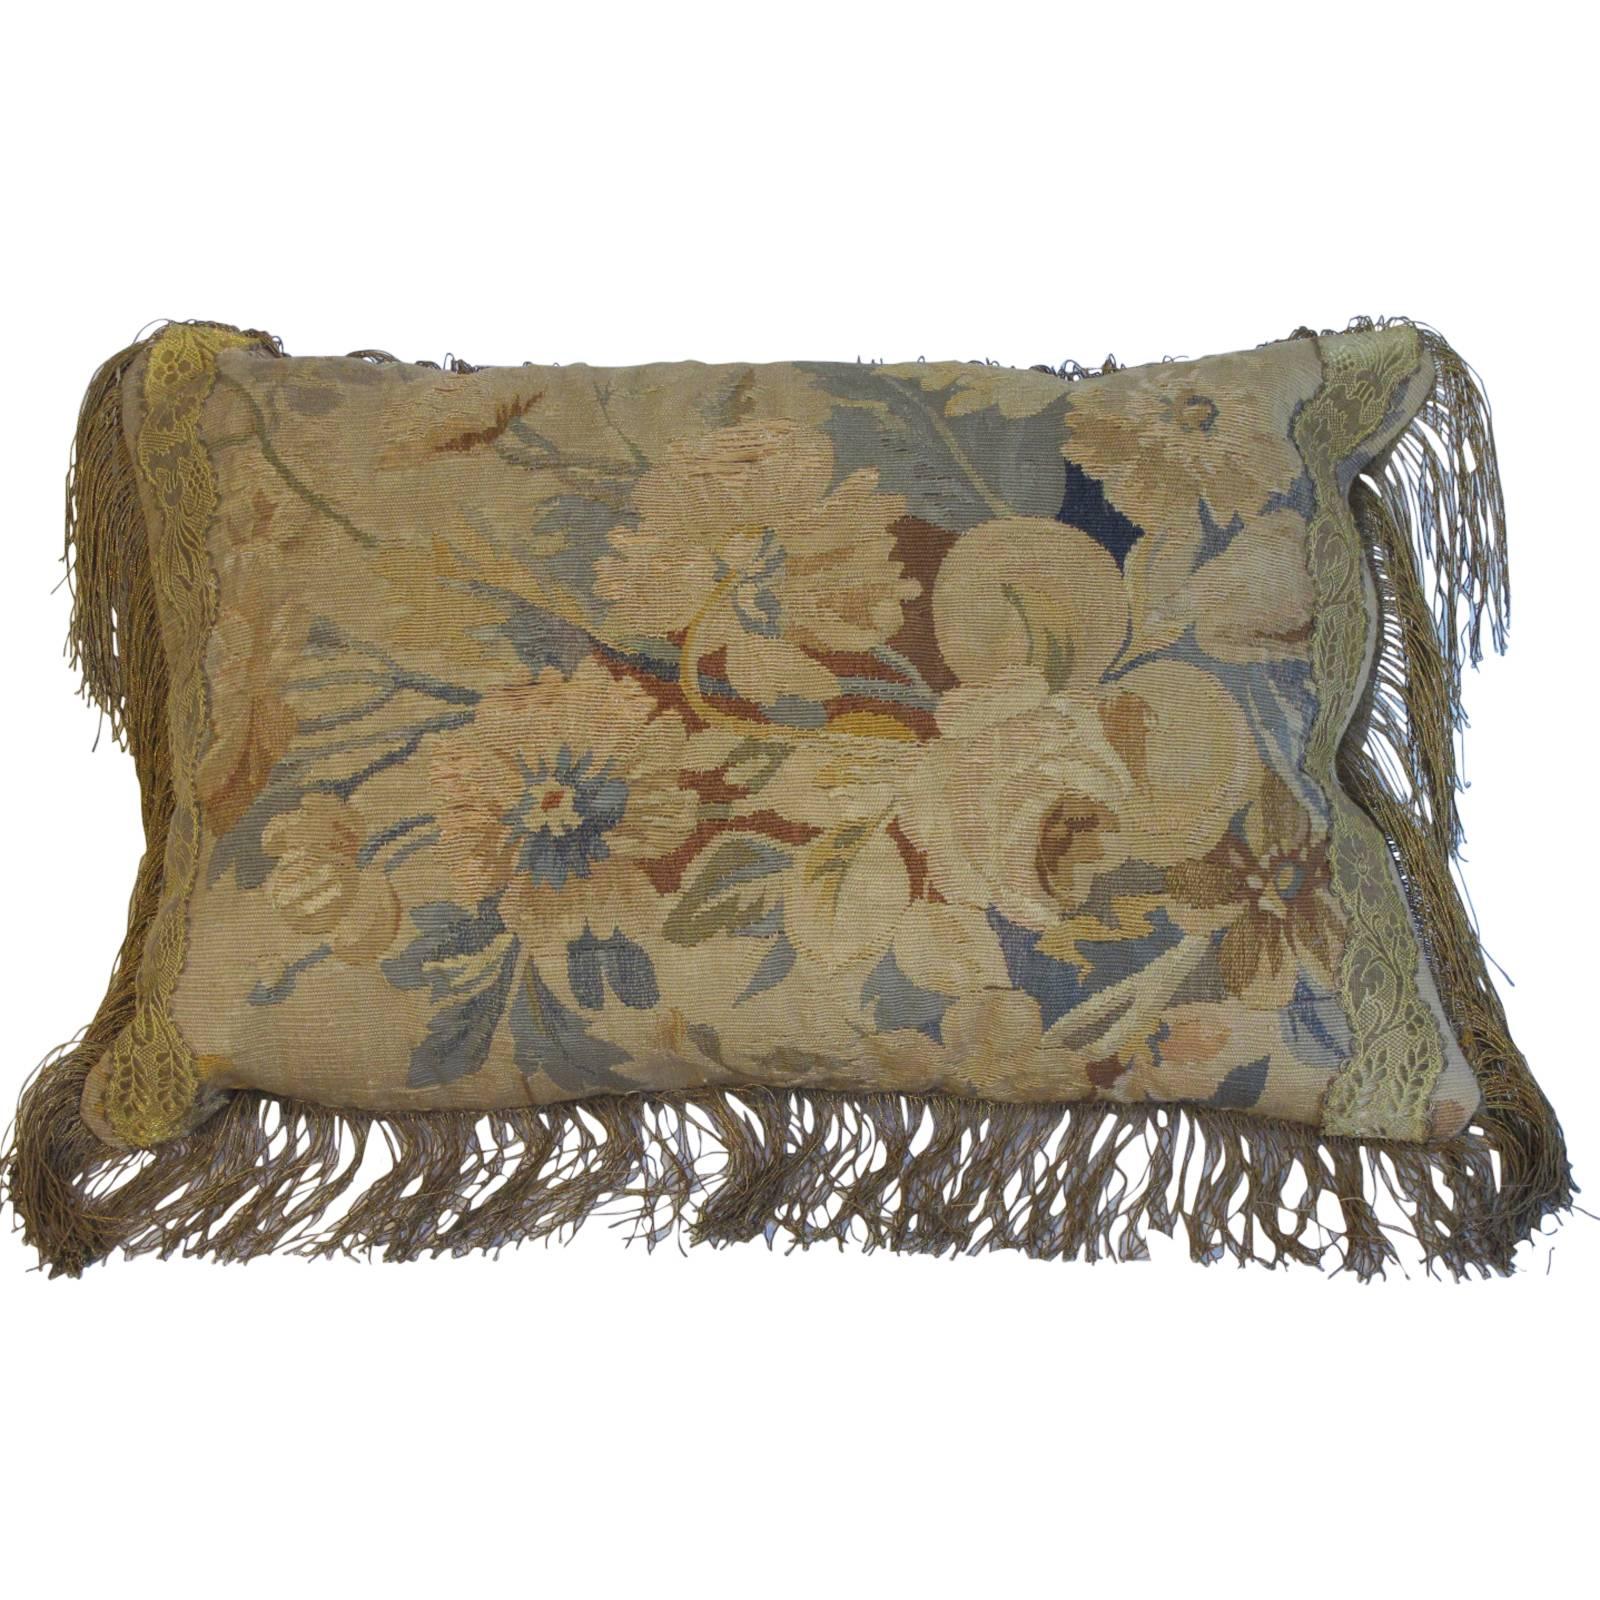 19th Century Aubusson Tapestry Pillow by Mary Jane McCarty Design